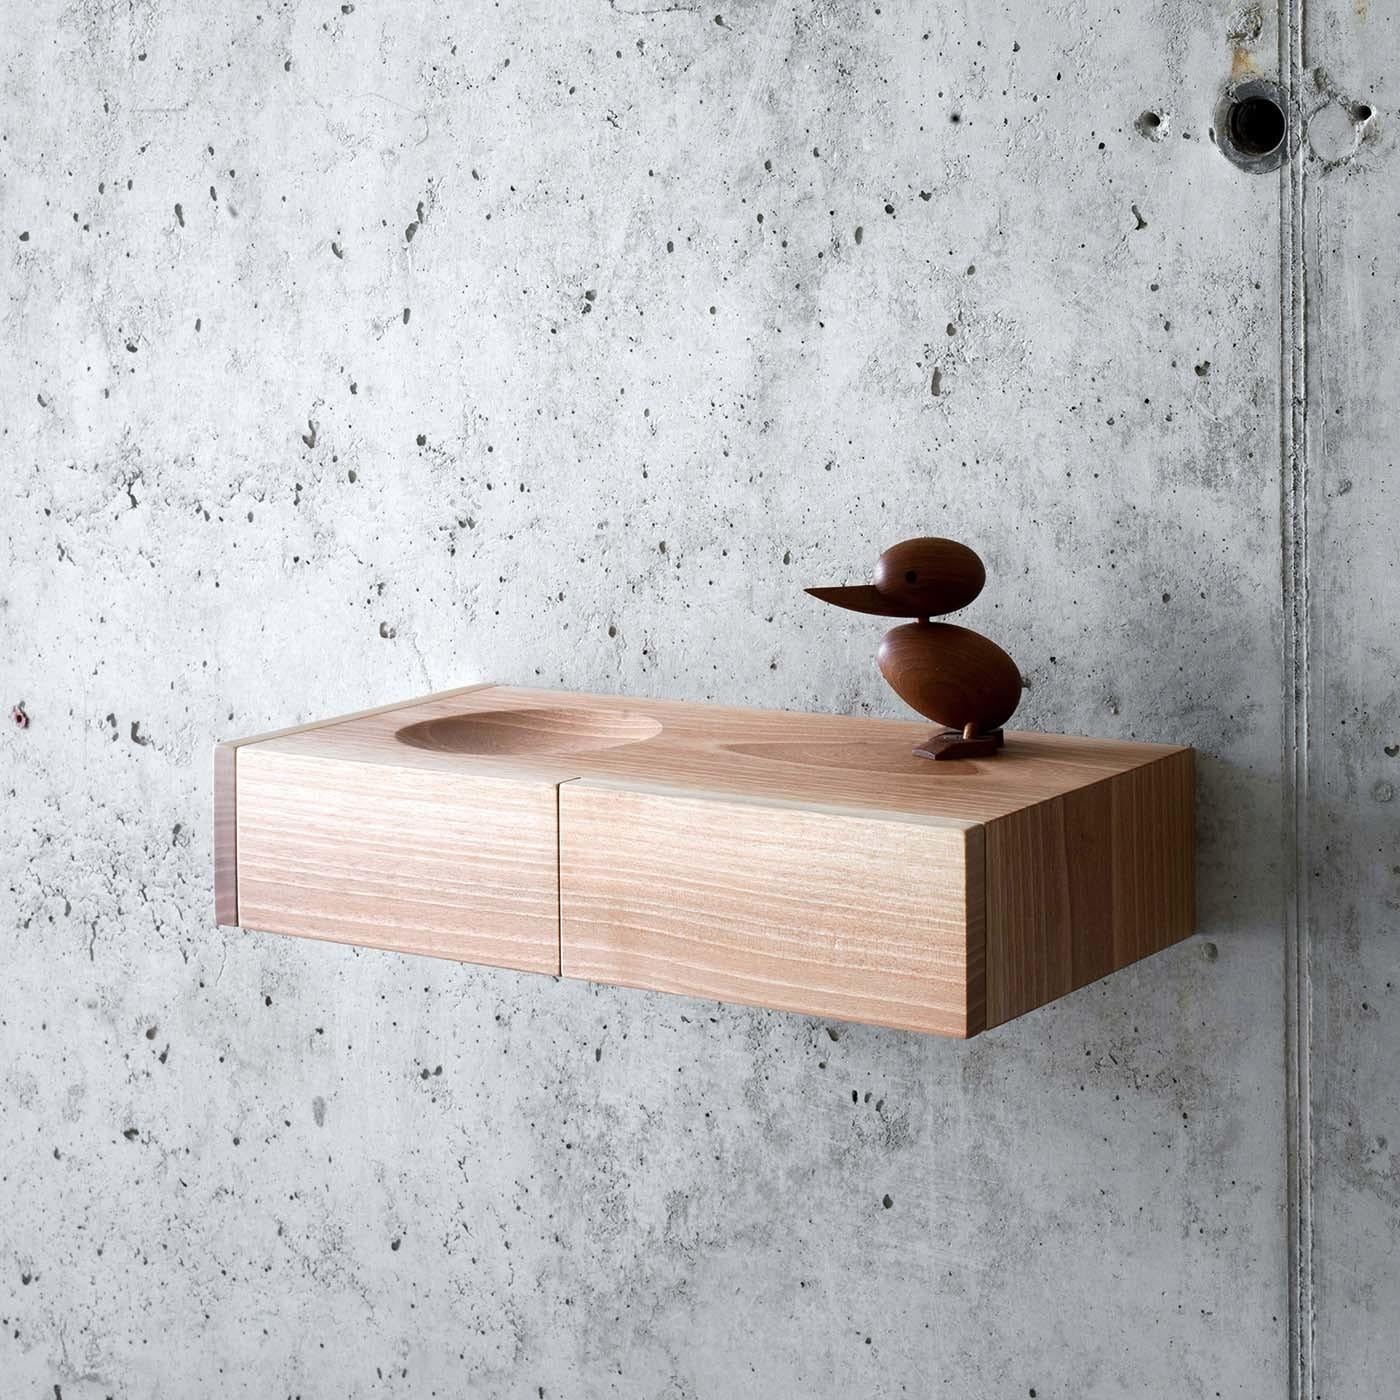 Designed by Pasquini Tranfa Architects, this elegant piece is the small version of the BÃ uti Shelf, a versatile and sophisticated tray to hang on a wall in an entryway, bedroom, or powder room. Its unique shape was crafted entirely of solid walnut